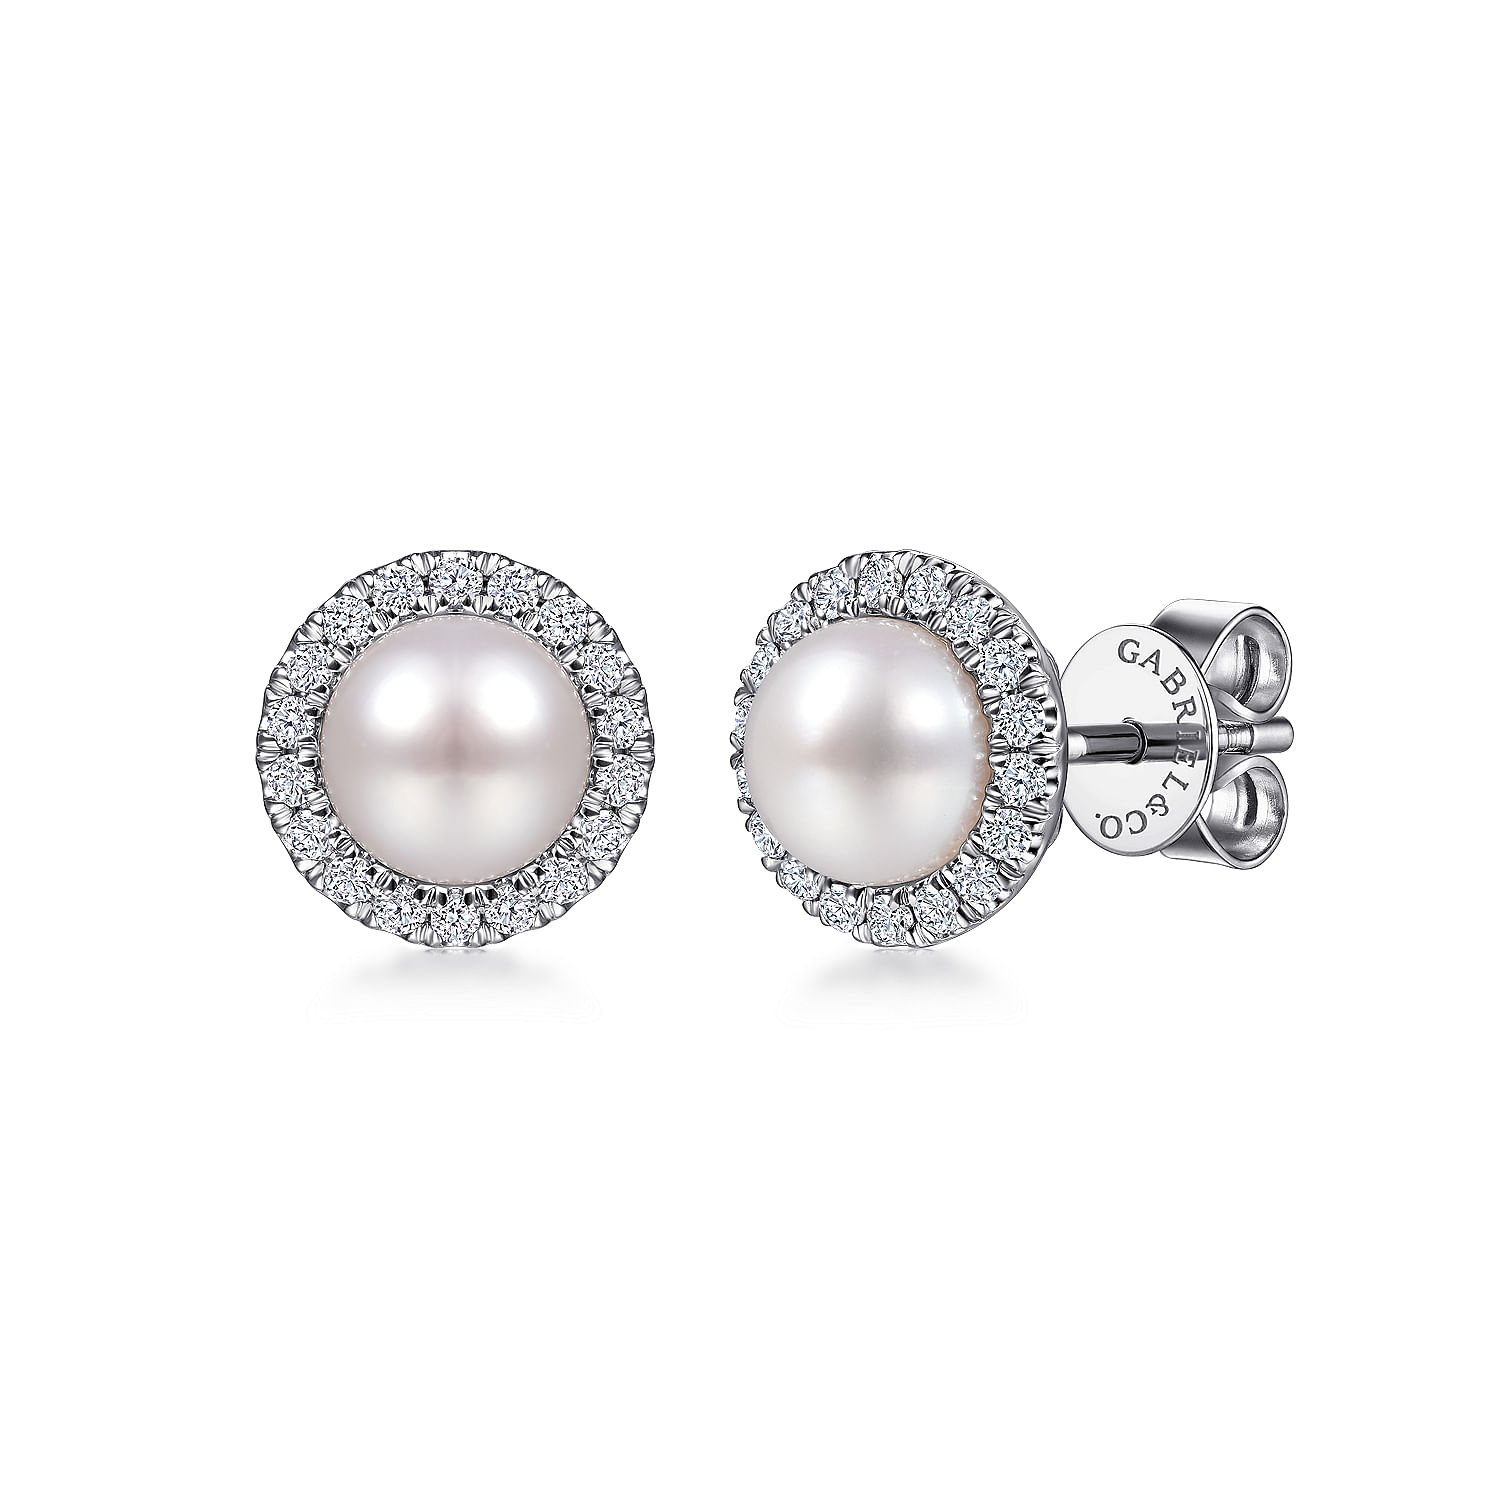 14K White Gold Pearl and Diamond Halo Stud Earrings